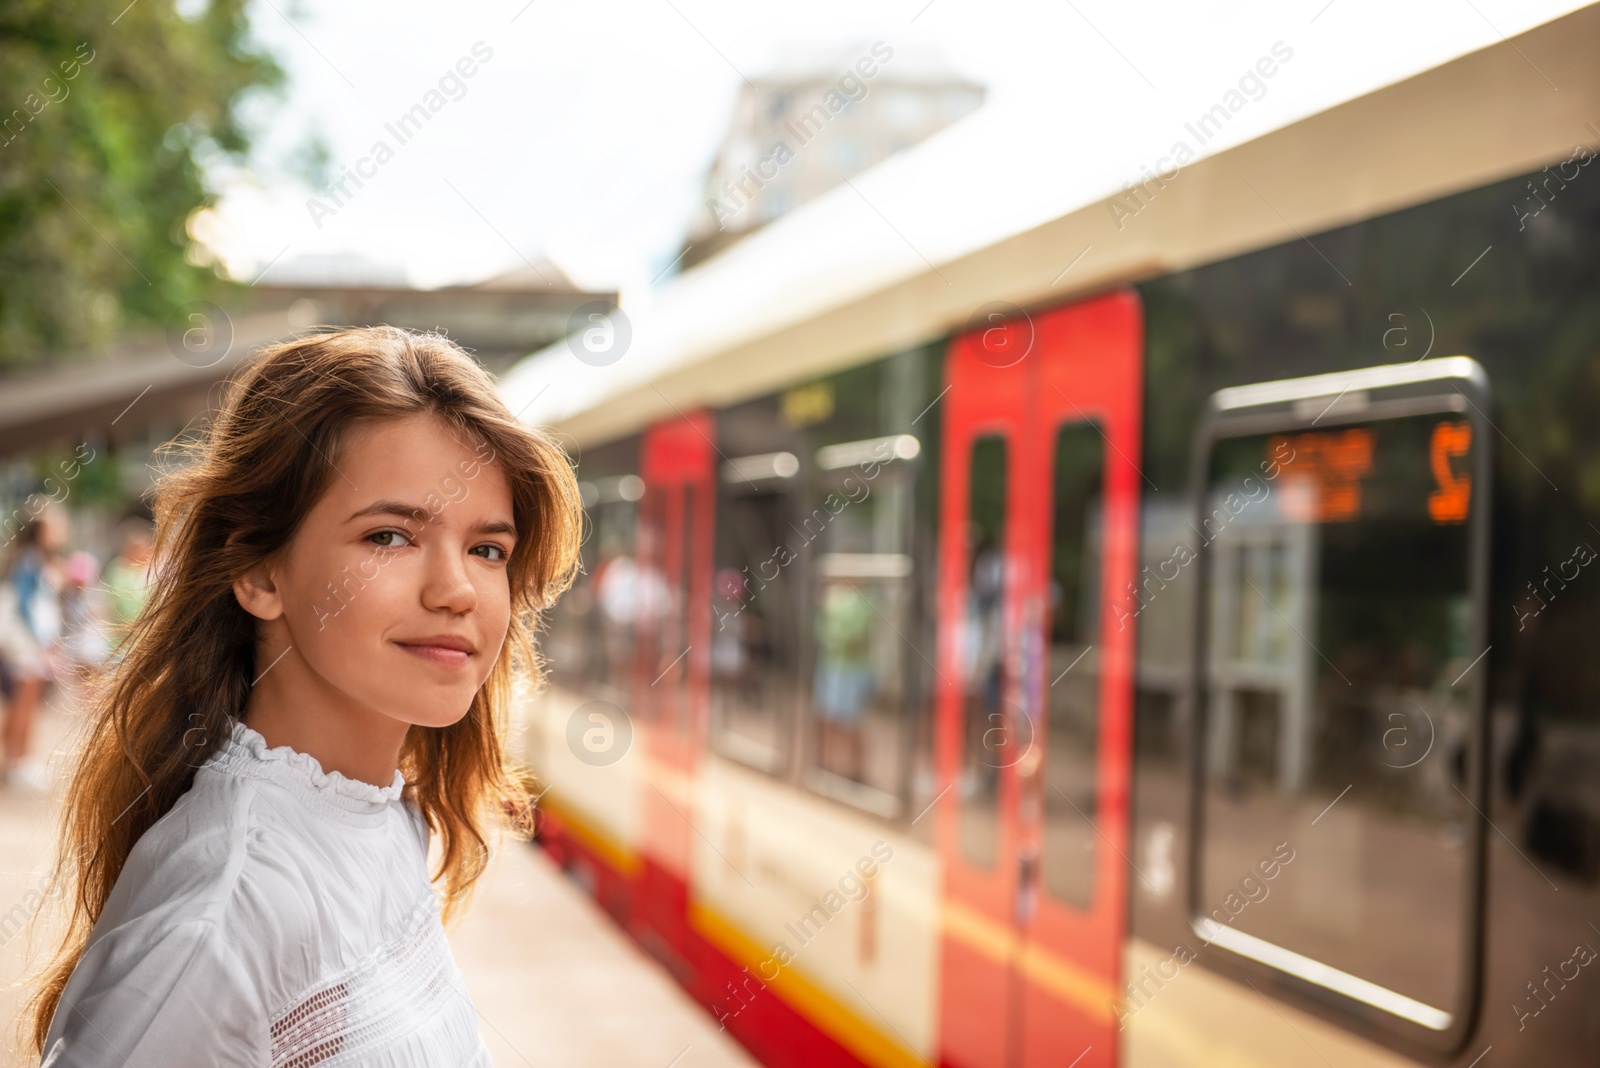 Photo of Teenage girl at train stop, space for text